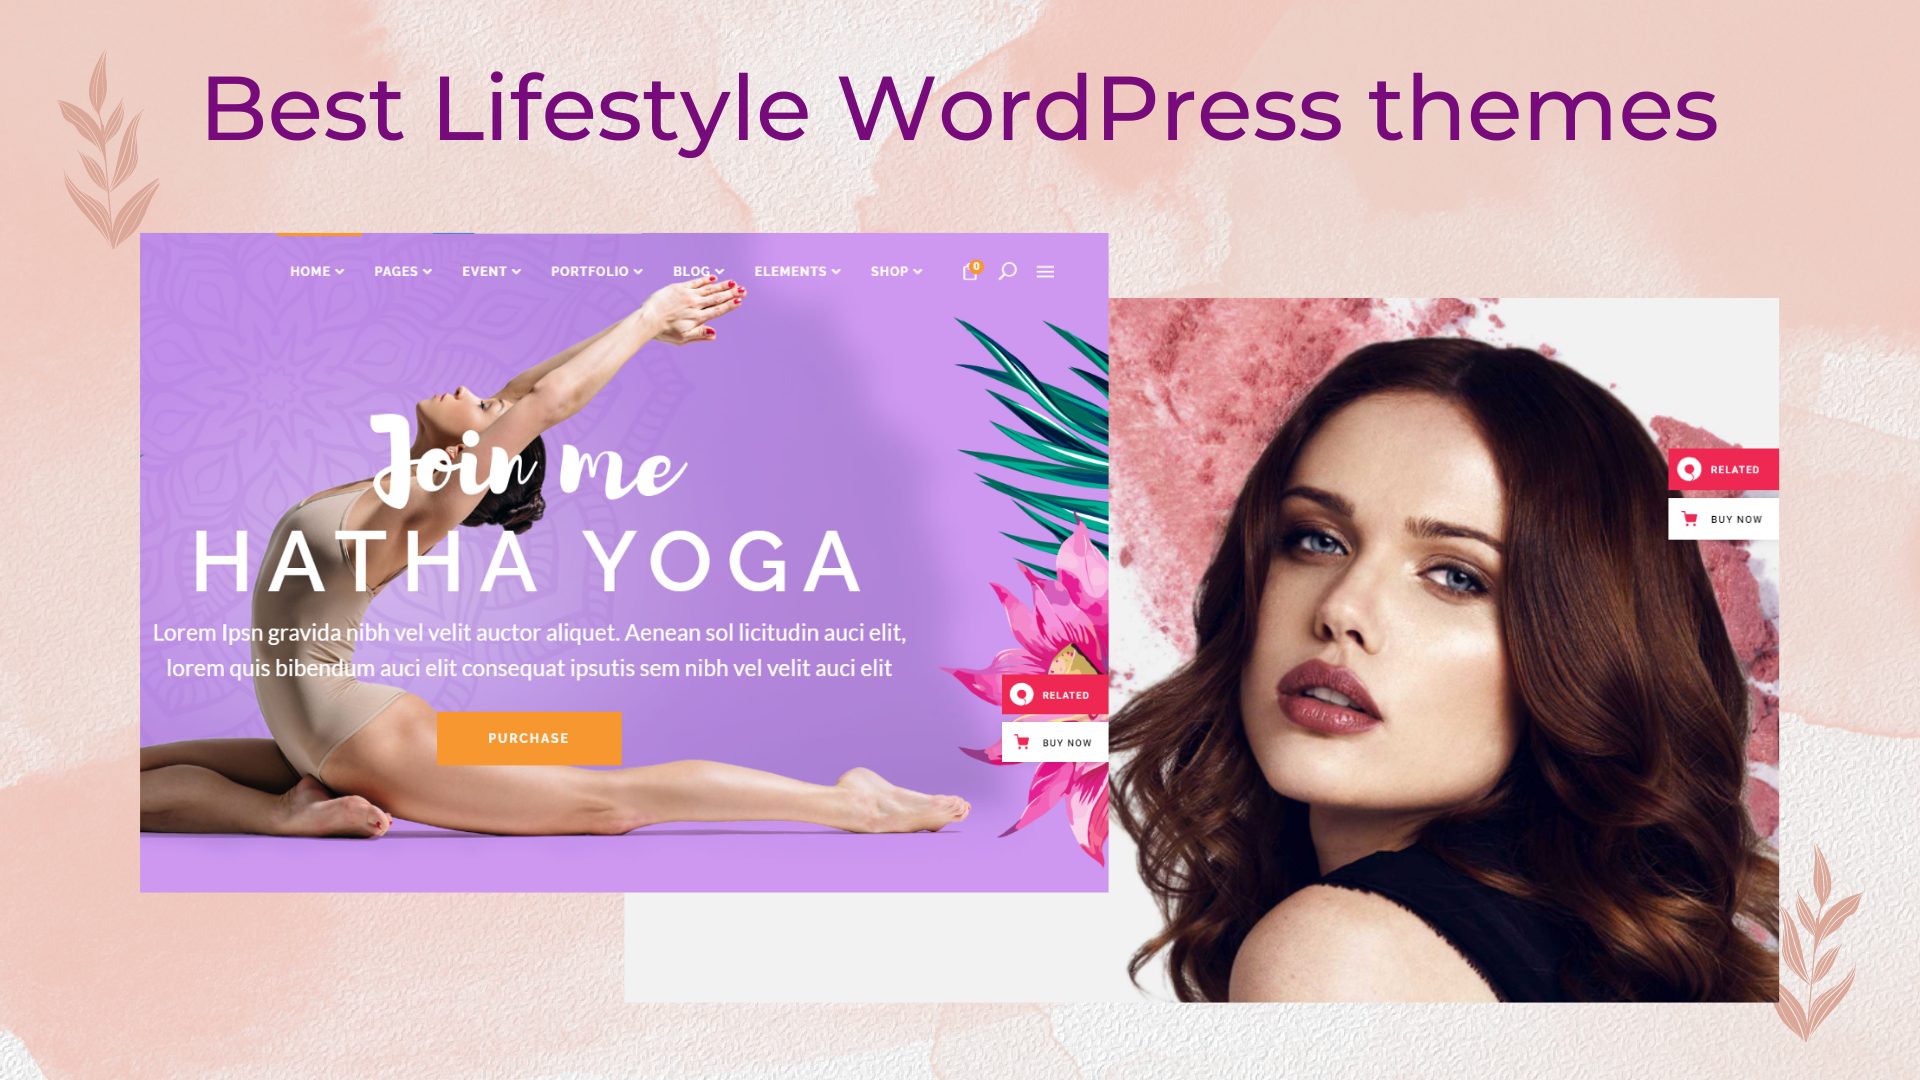 best WordPress themes for lifestyle blogs